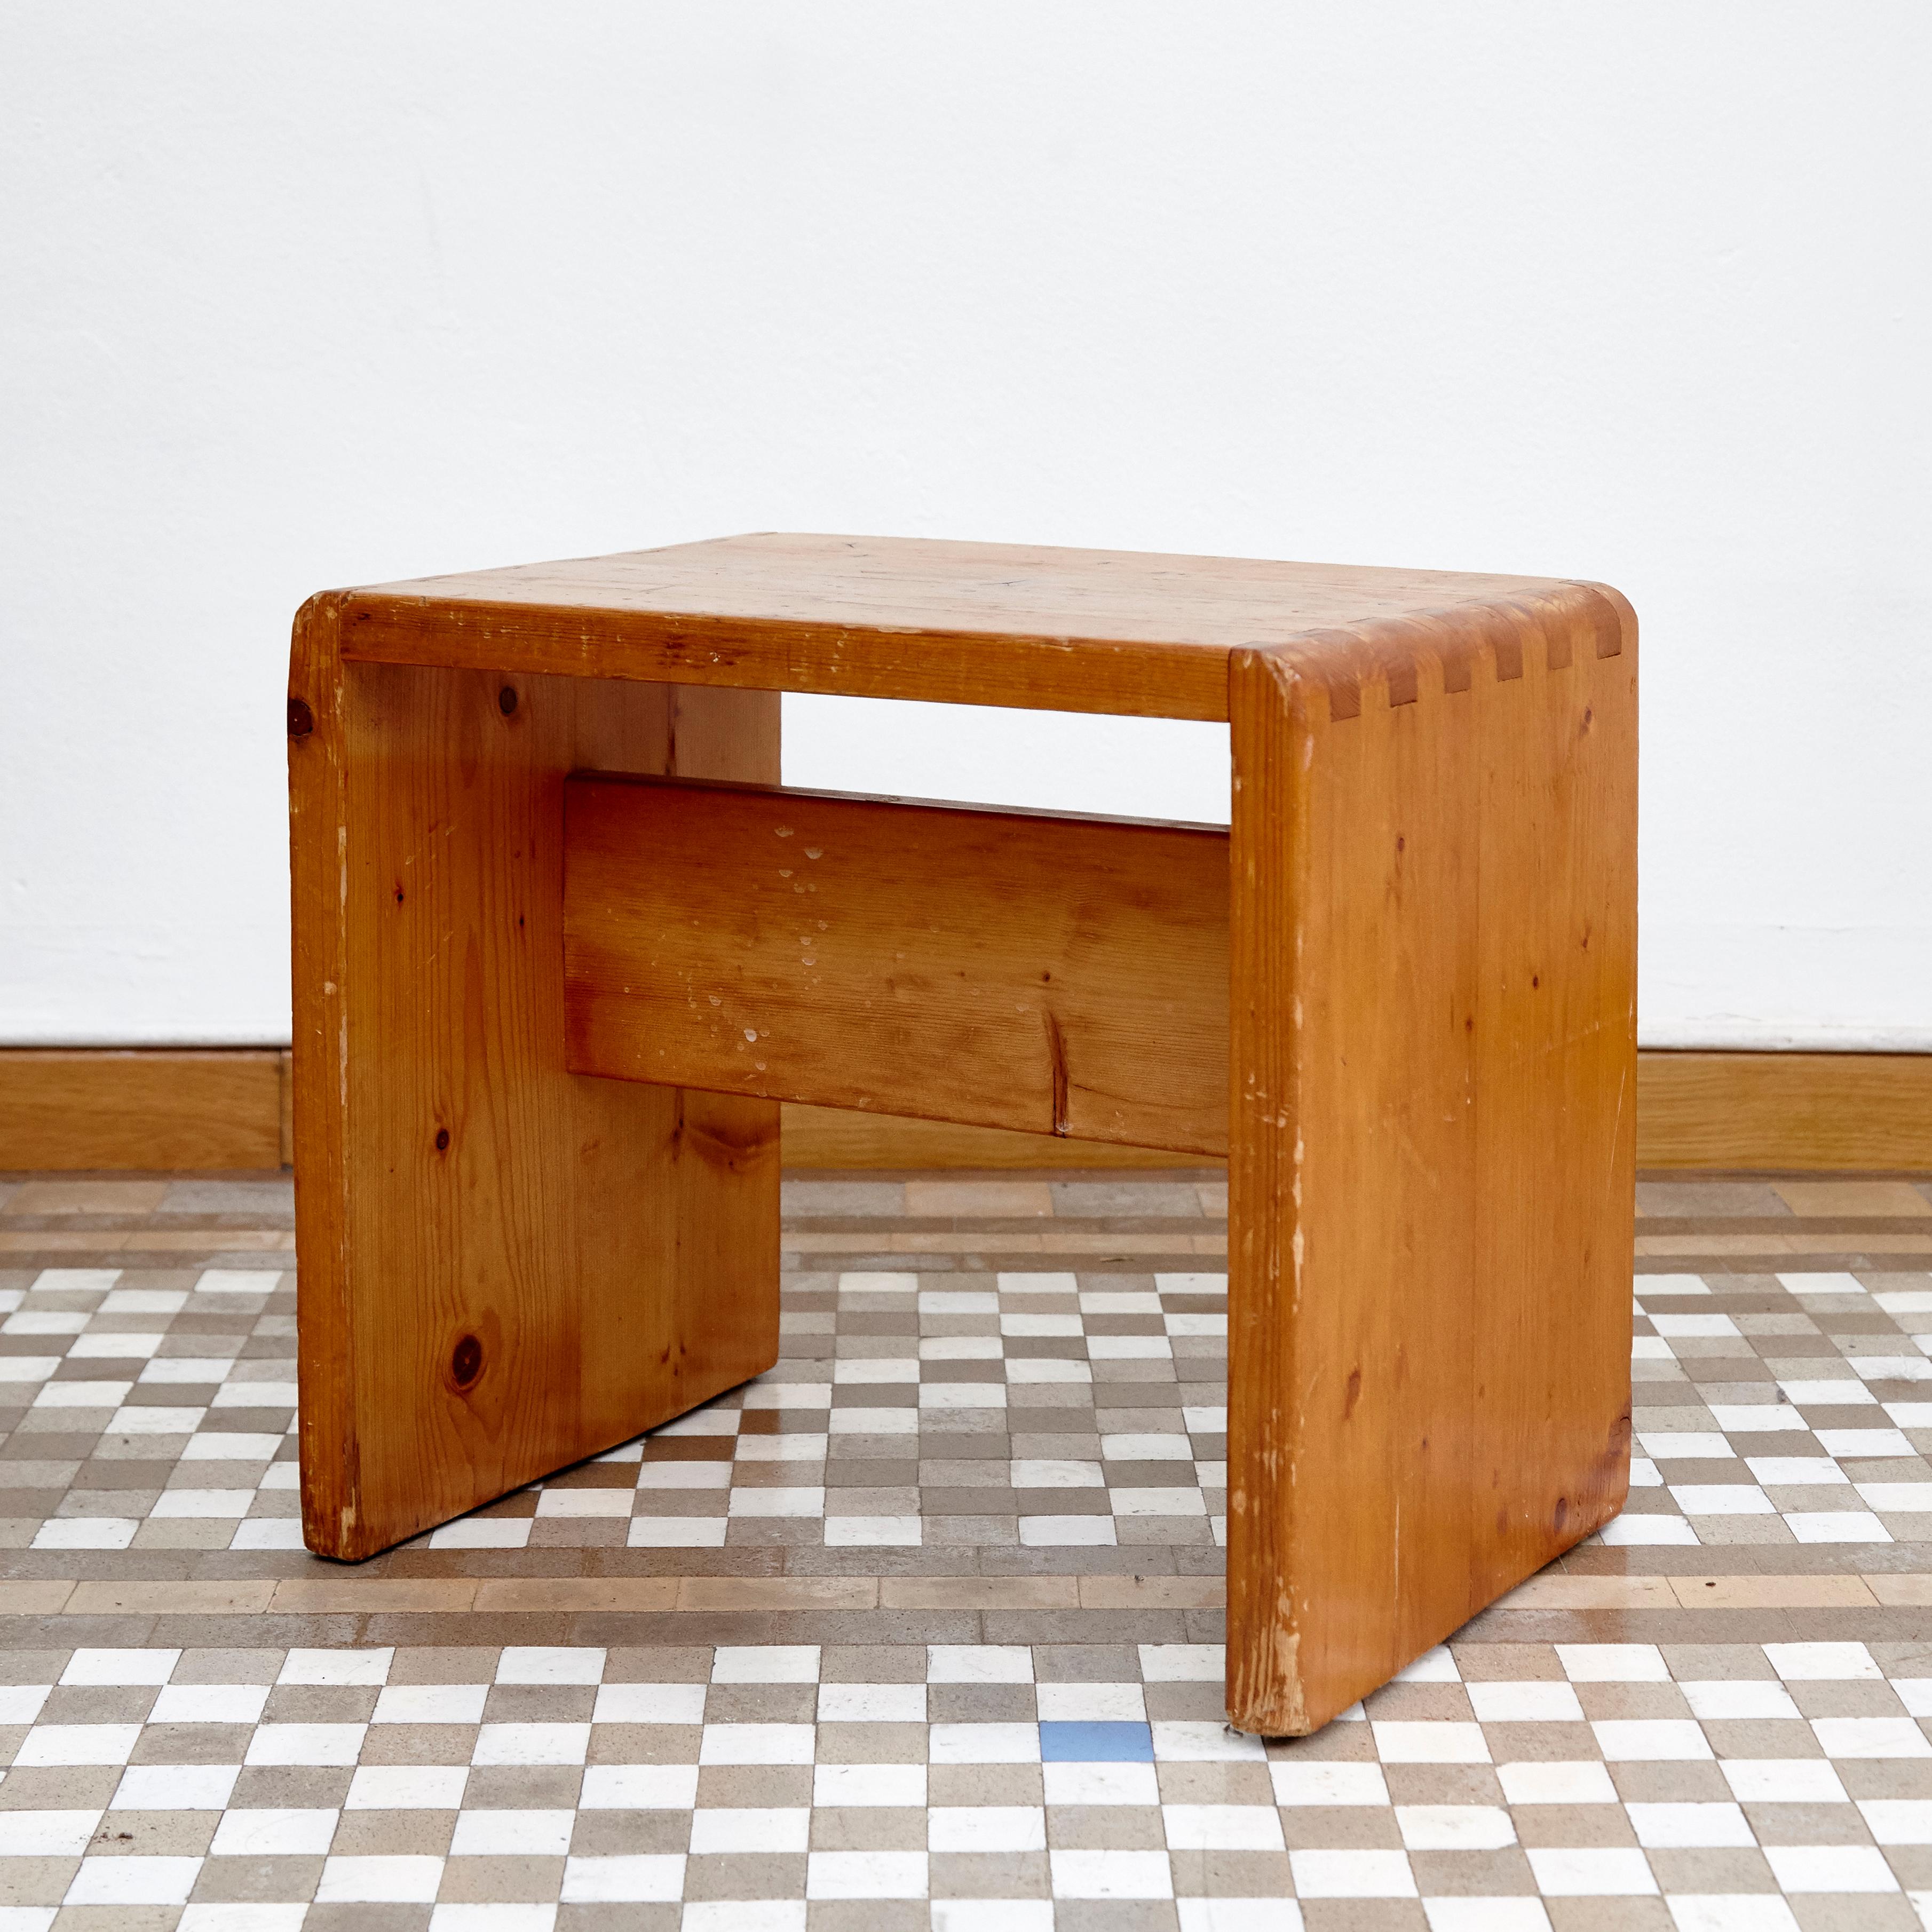 Stools designed by Charlotte Perriand for Les Arcs ski Resort, circa 1960, manufactured in France.
Pine wood.

In good original condition, with minor wear consistent with age and use, preserving a beautiful patina.

Charlotte Perriand